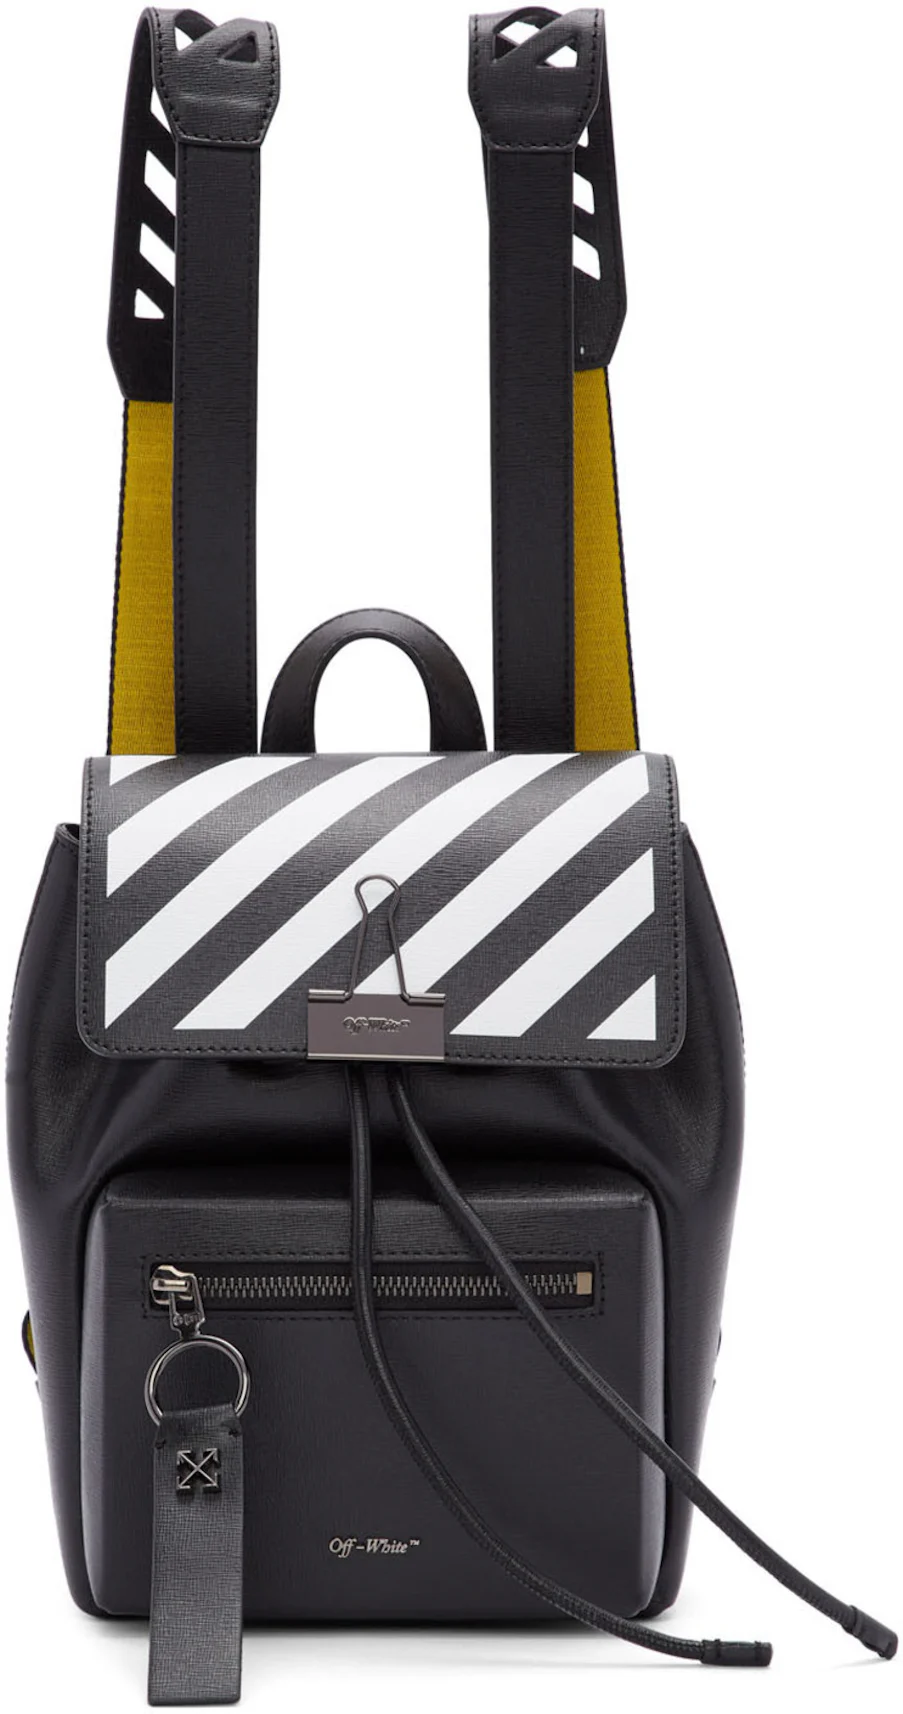 OFF-WHITE Backpack Diag Black White Yellow in Leather with Gunmetal - US